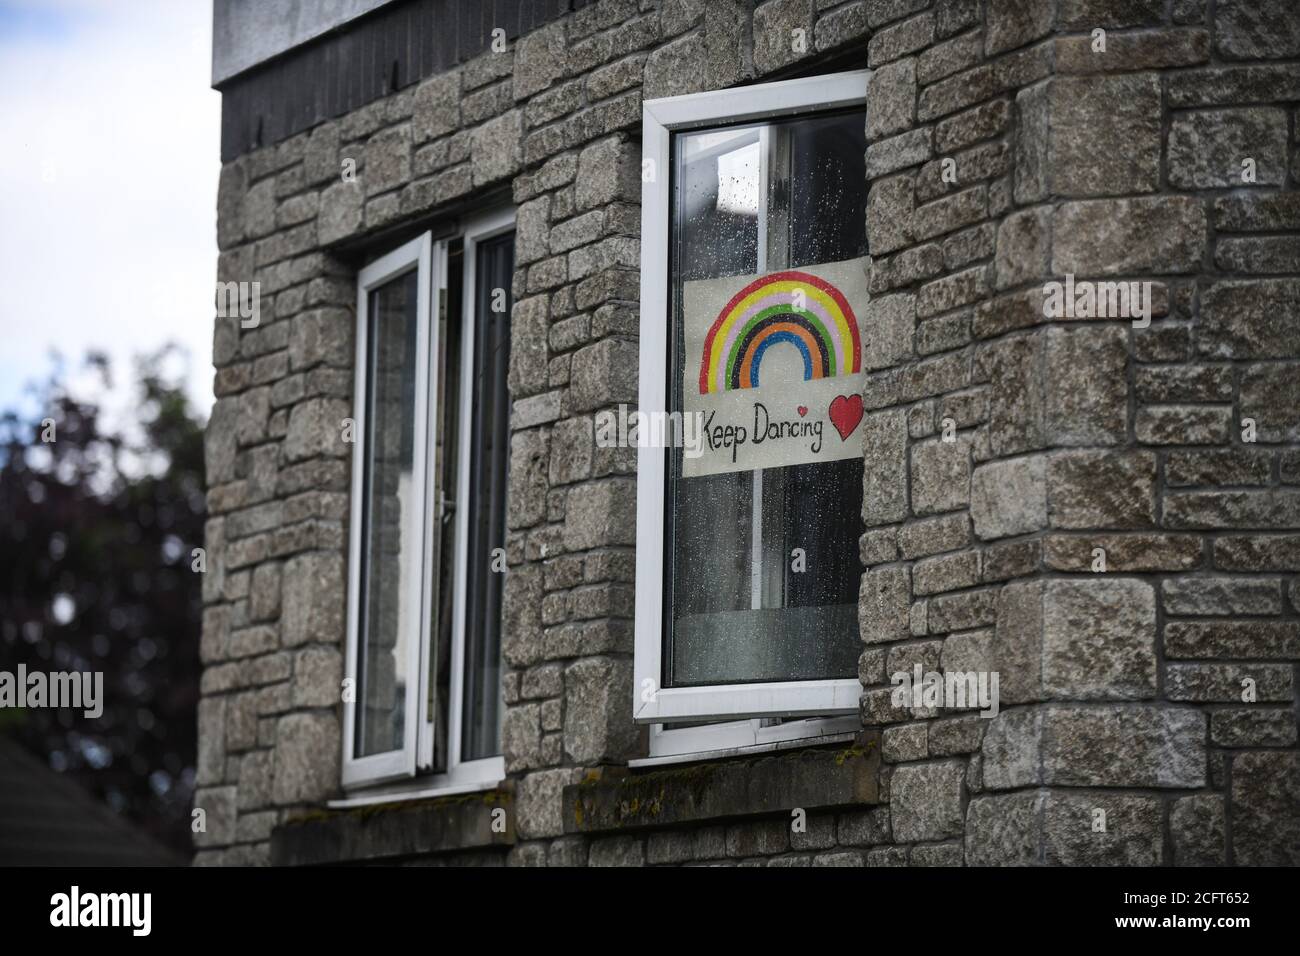 A rainbow sign in a window full of positive words during the coronavirus lockdown period in the UK. Households all over the country put signs in their Stock Photo